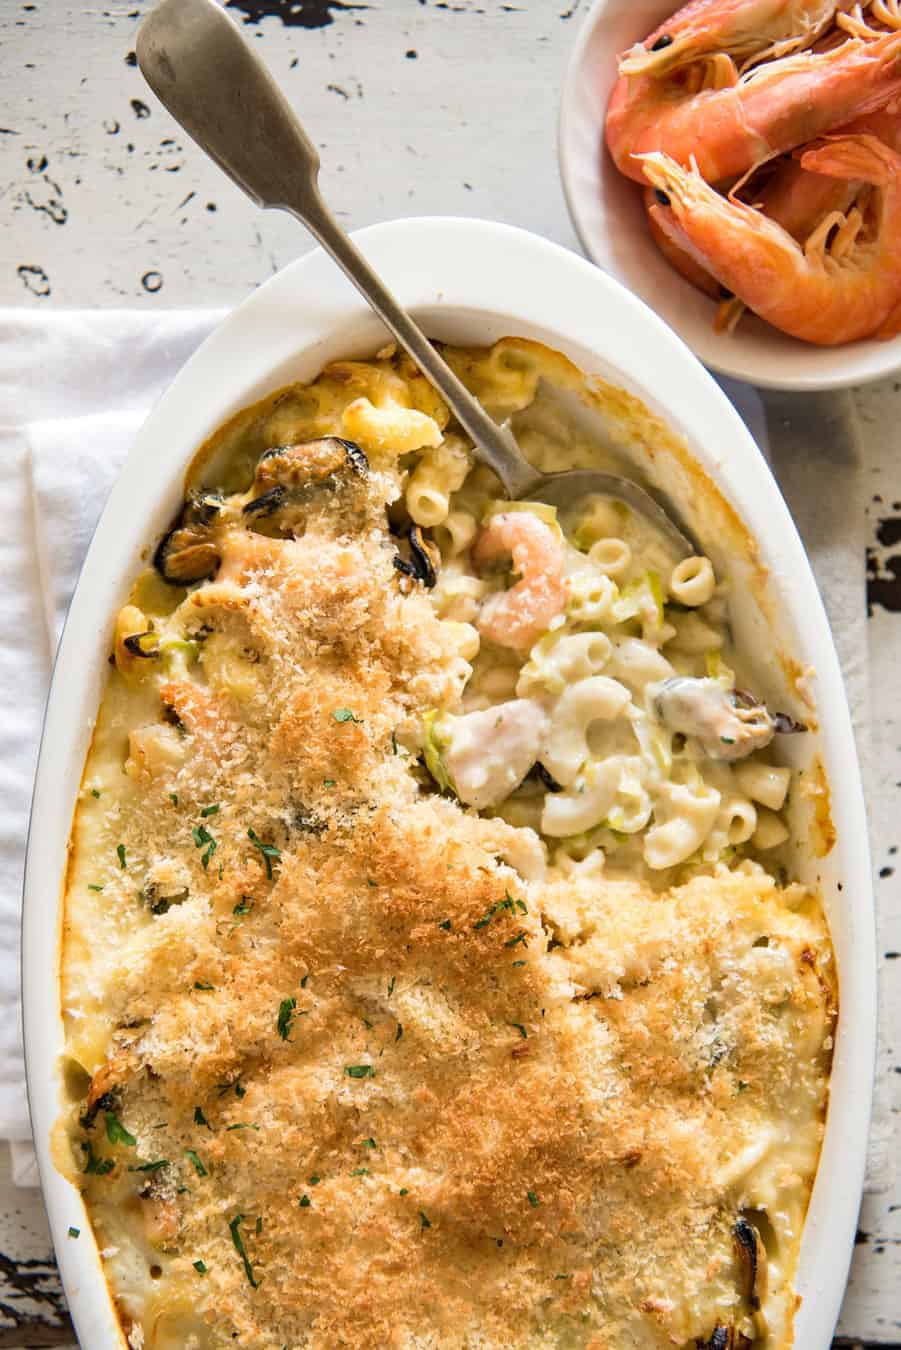 Seafood Gratin Pasta Bake - mixed seafood (your choice!) and pasta baked in a creamy sauce with a crunchy breadcrumb and cheese topping!